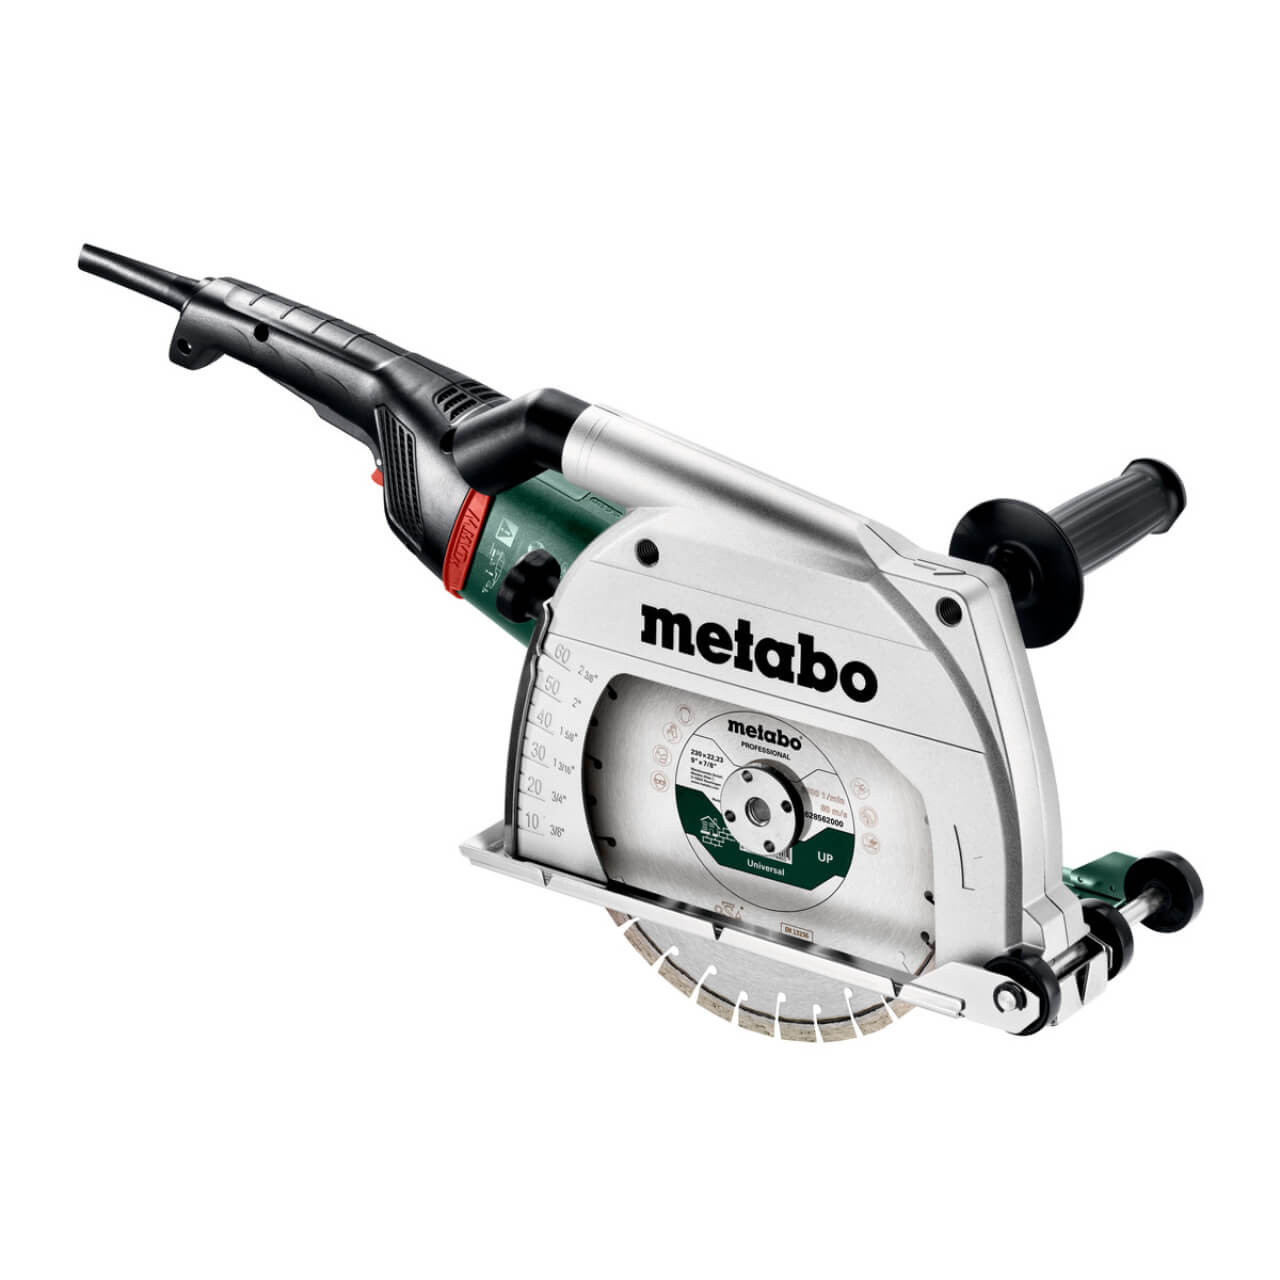 Metabo TE 24-230 MVT CED 2400W 230mm Diamond Cutting System including Extraction Shroud